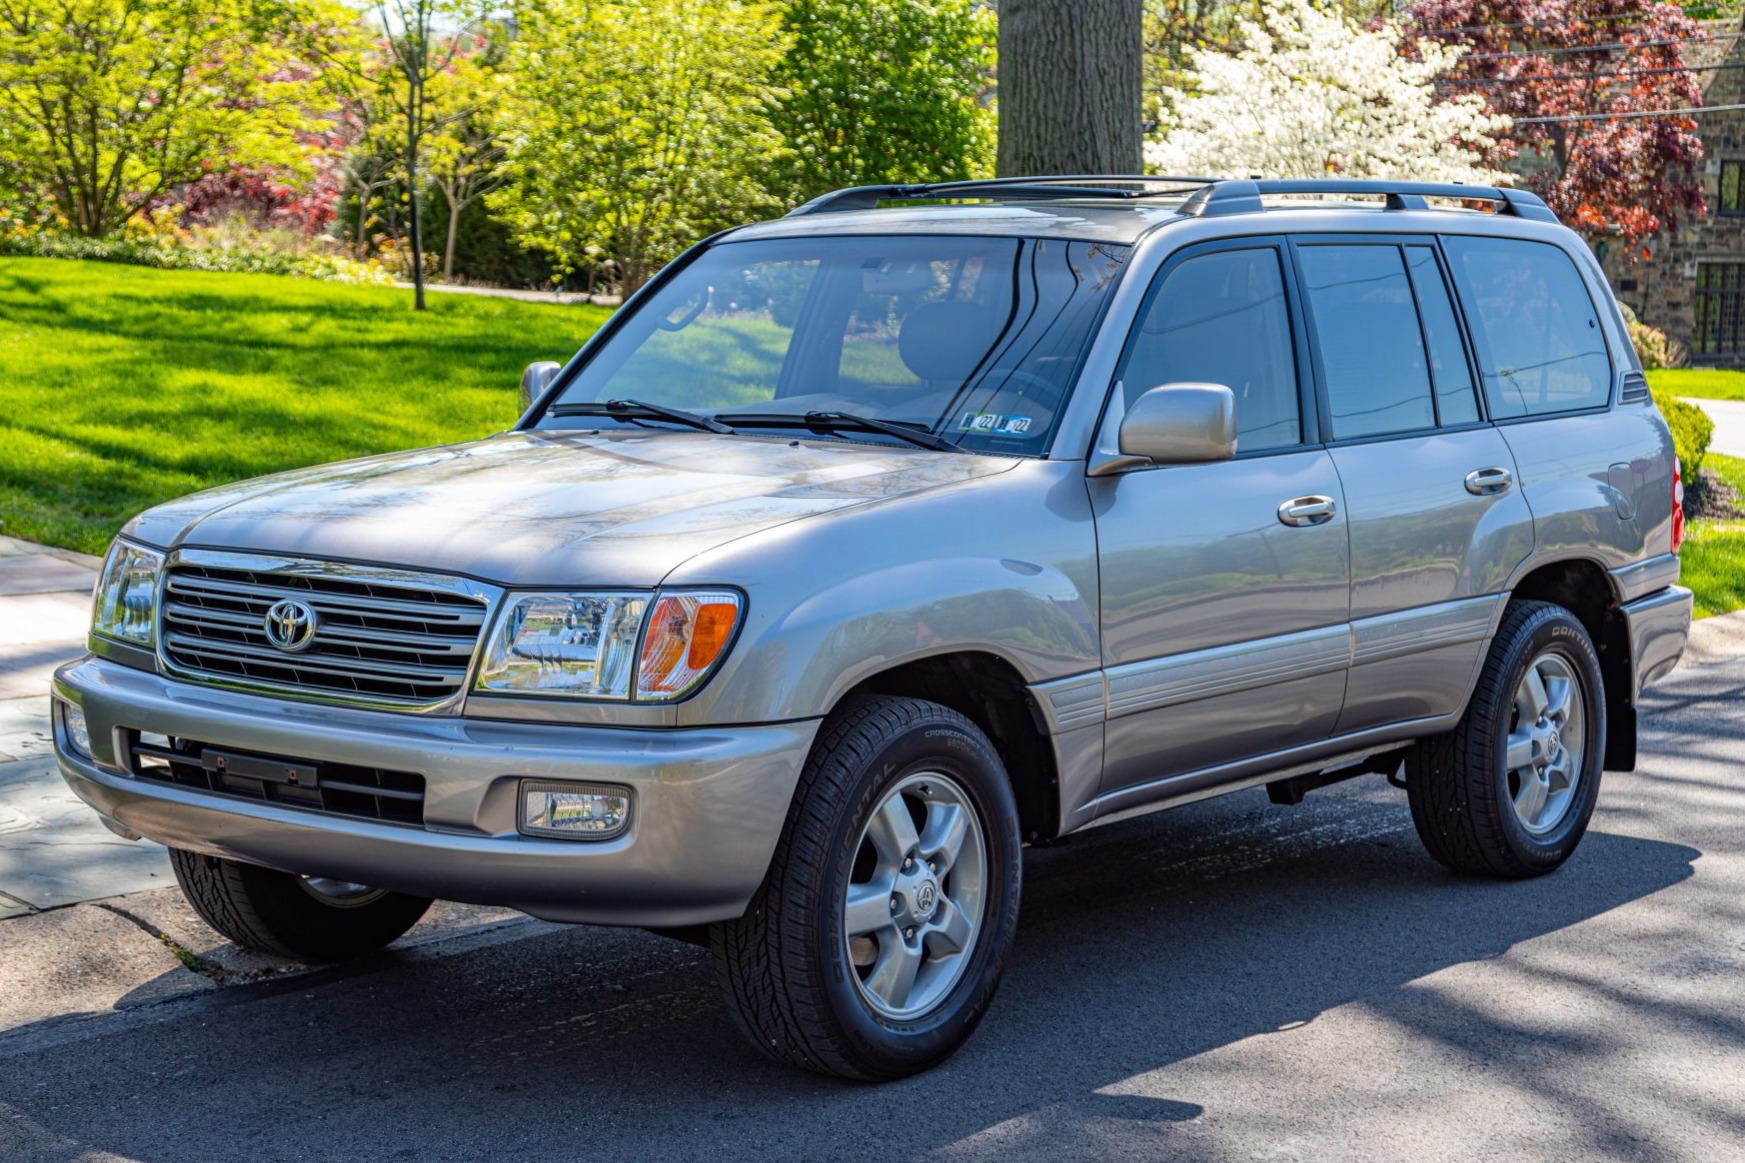 No Reserve: 2003 Toyota Land Cruiser UZJ100 for sale on BaT Auctions - sold  for $14,750 on May 31, 2022 (Lot #74,889) | Bring a Trailer